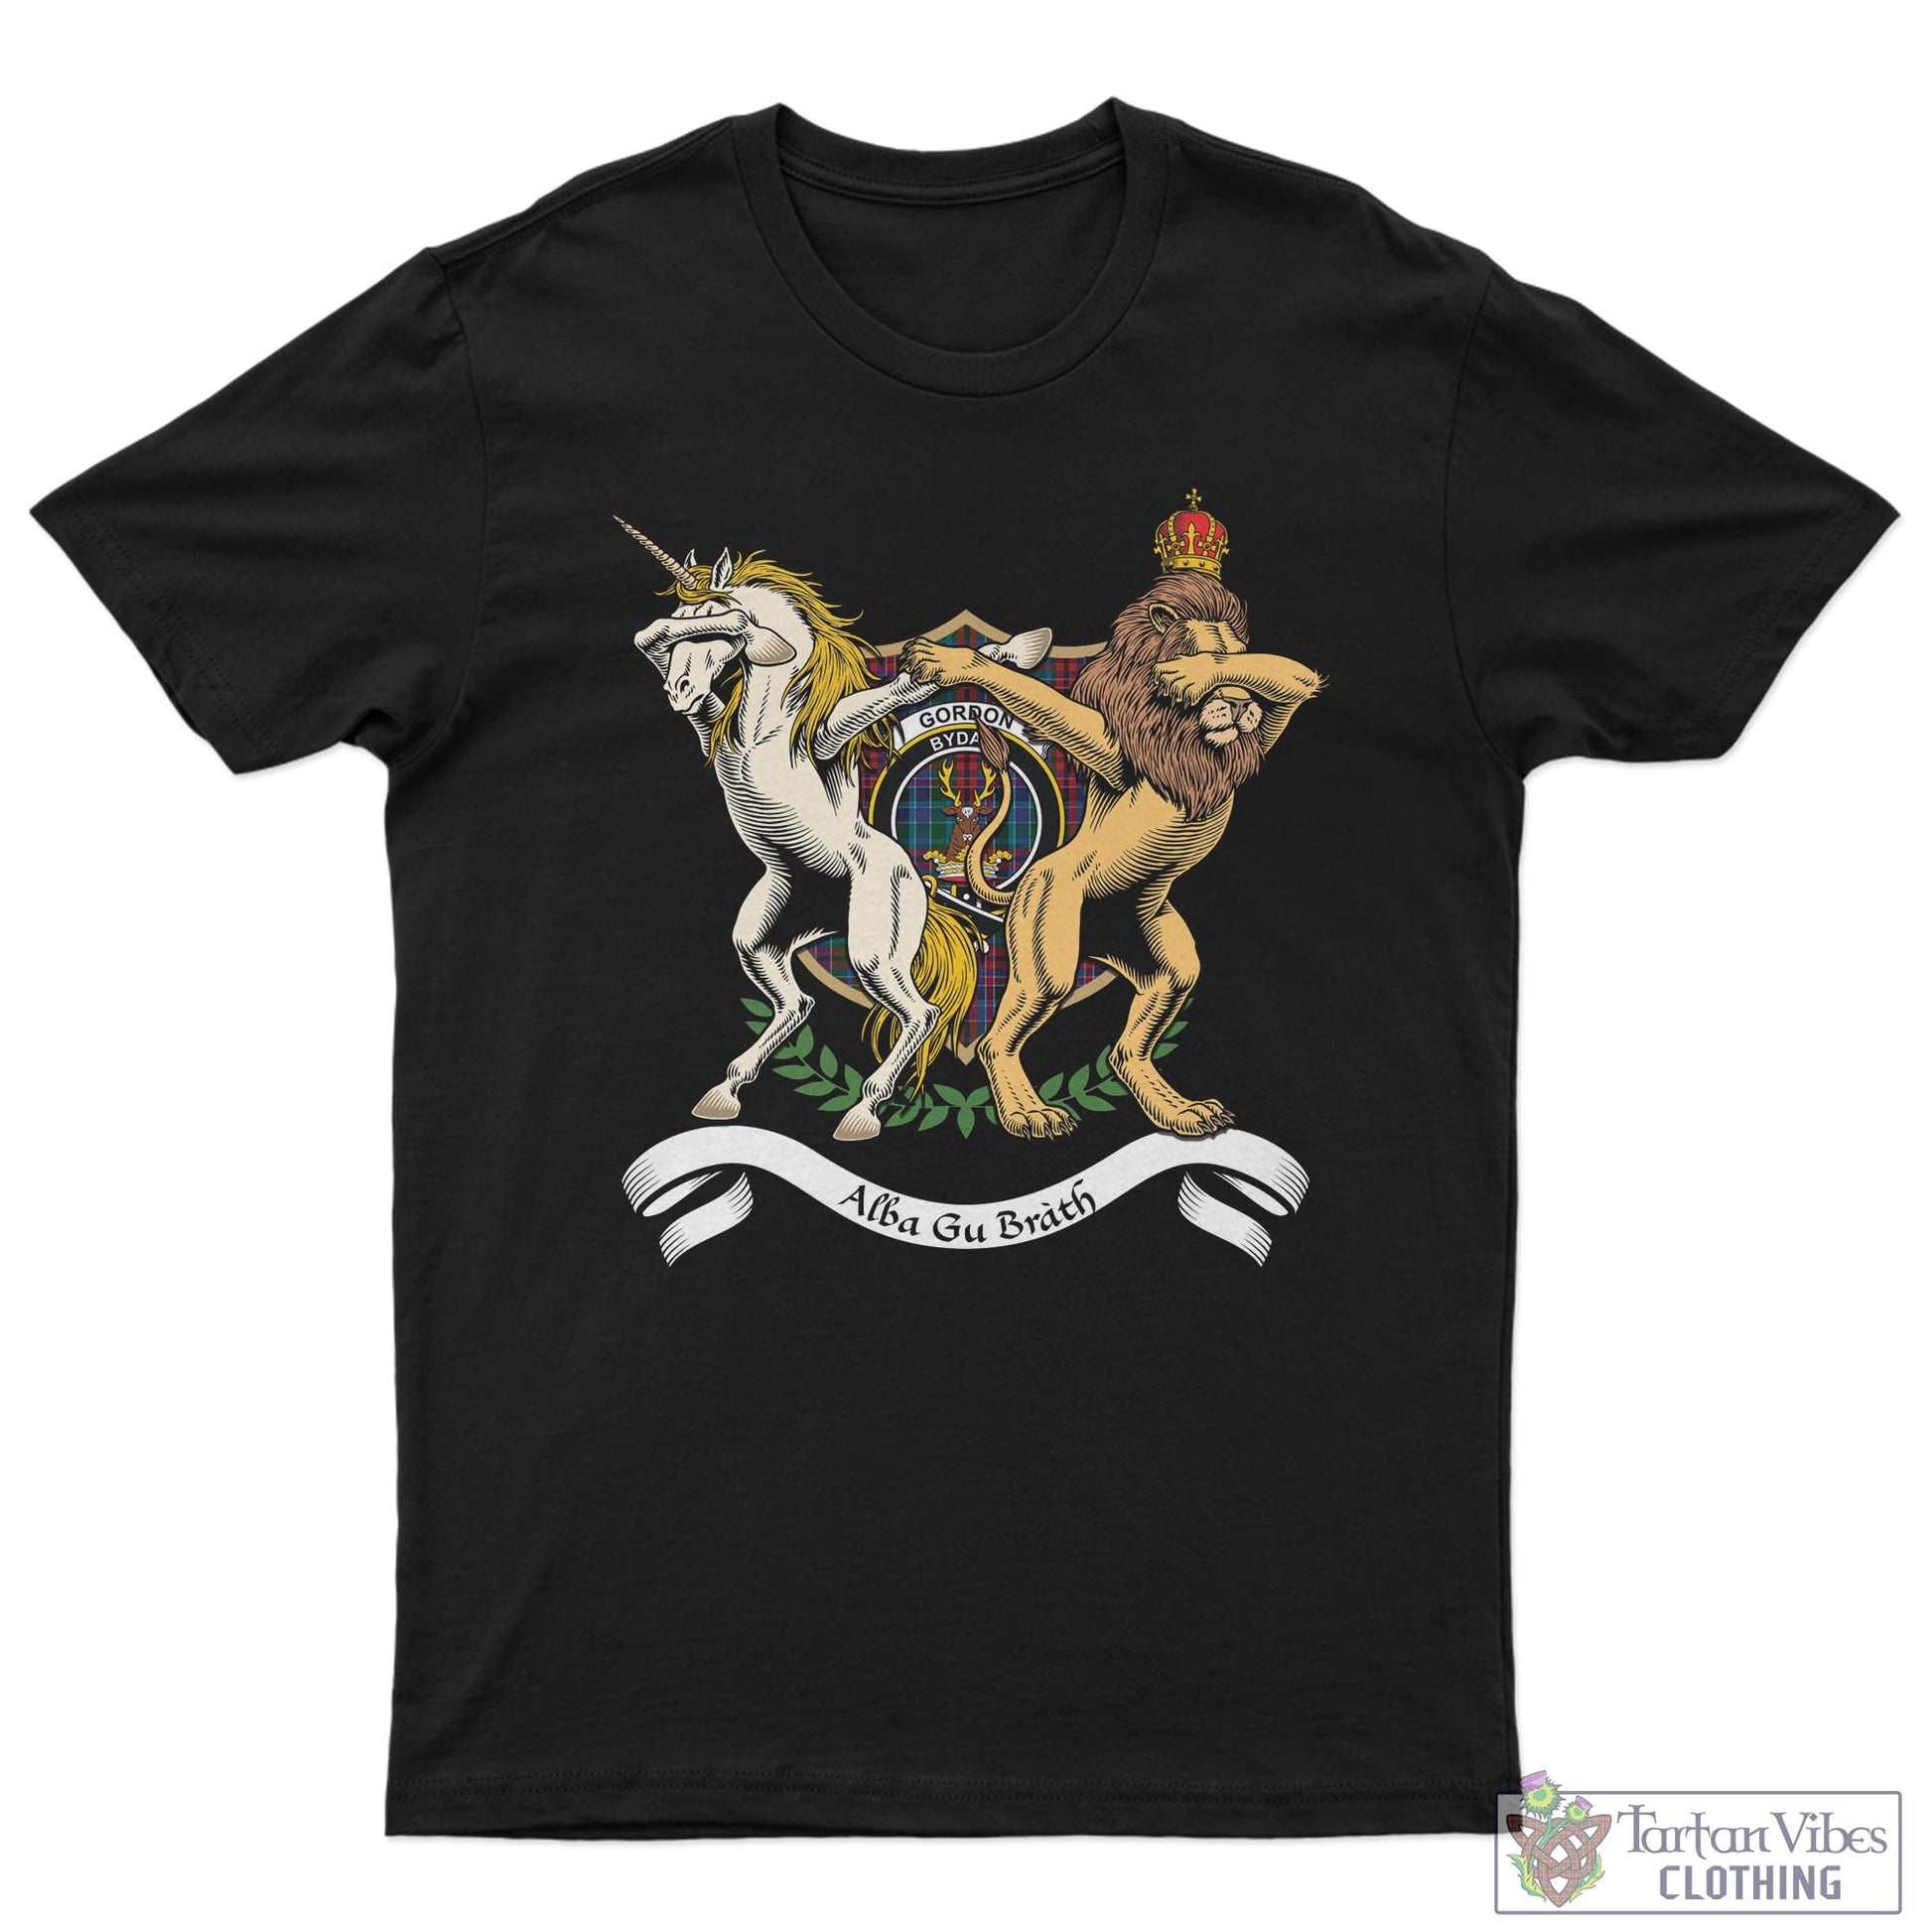 Tartan Vibes Clothing Gordon Red Family Crest Cotton Men's T-Shirt with Scotland Royal Coat Of Arm Funny Style